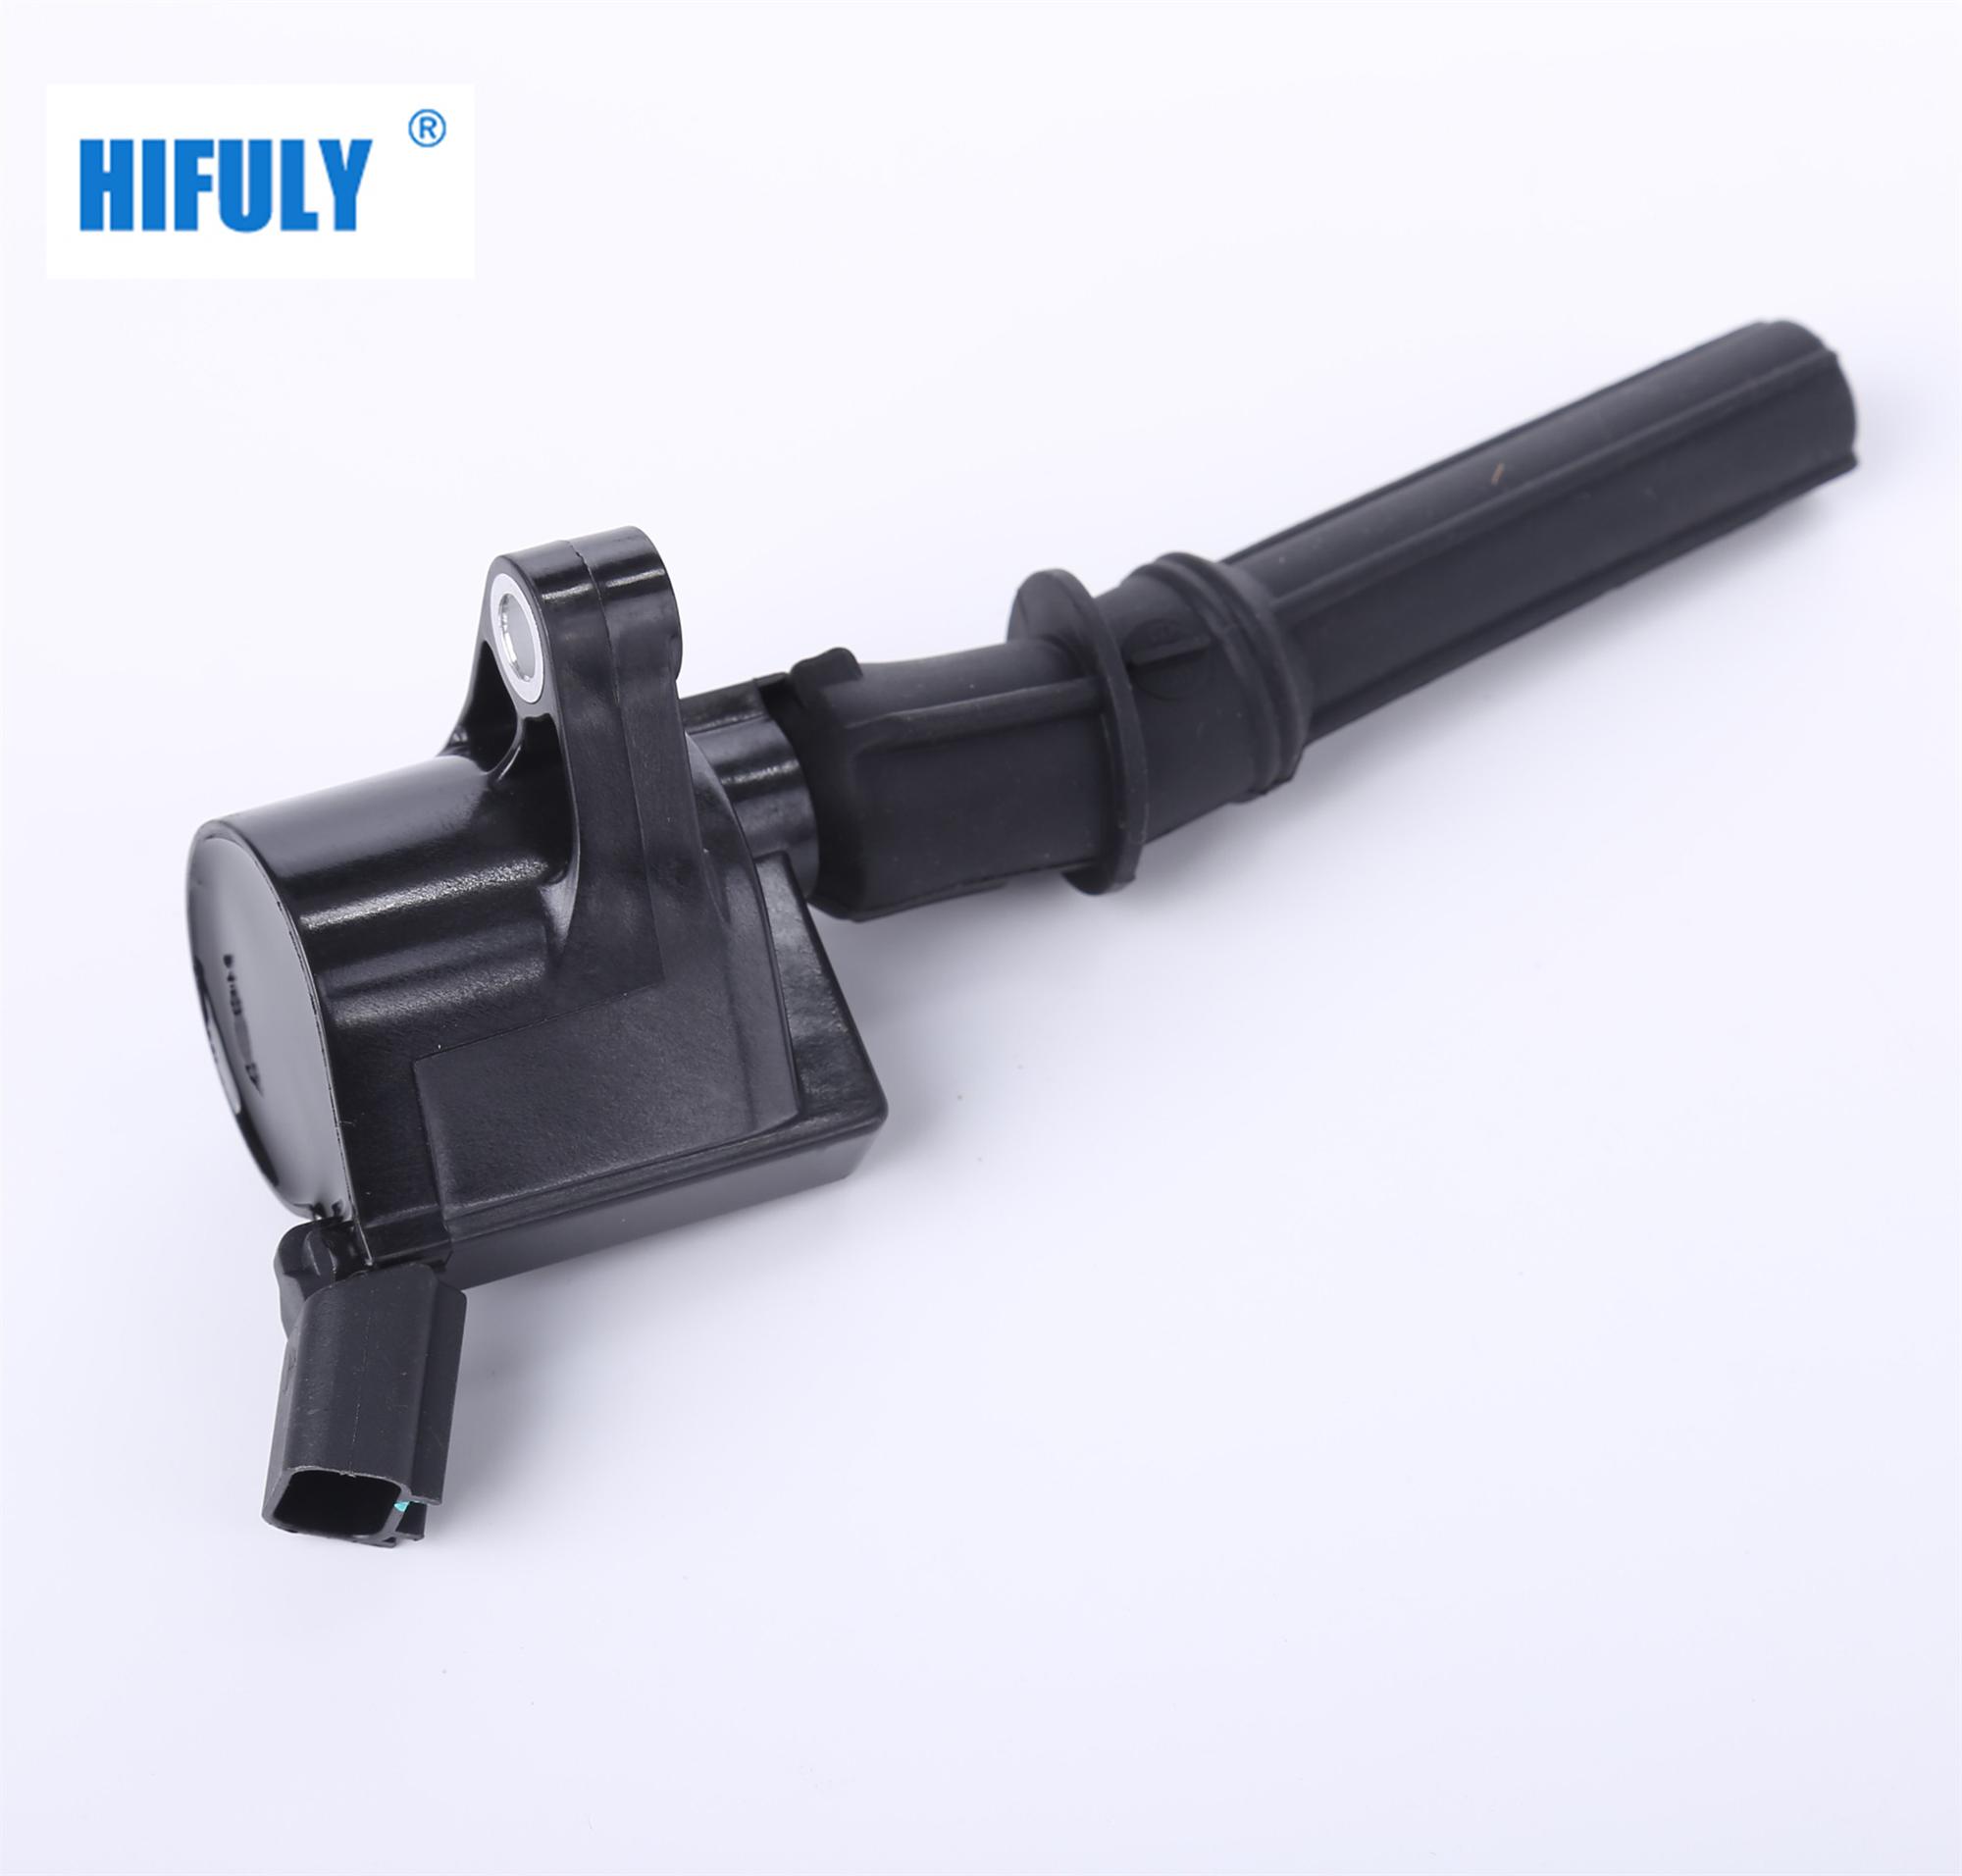 Ignition Coil For Ford E-150 E-250 E-350 E-450 E-550 F150 F250 F350 CROWN MUSTANG EXPEDITION LINCOLN MERCURY MG ROVER